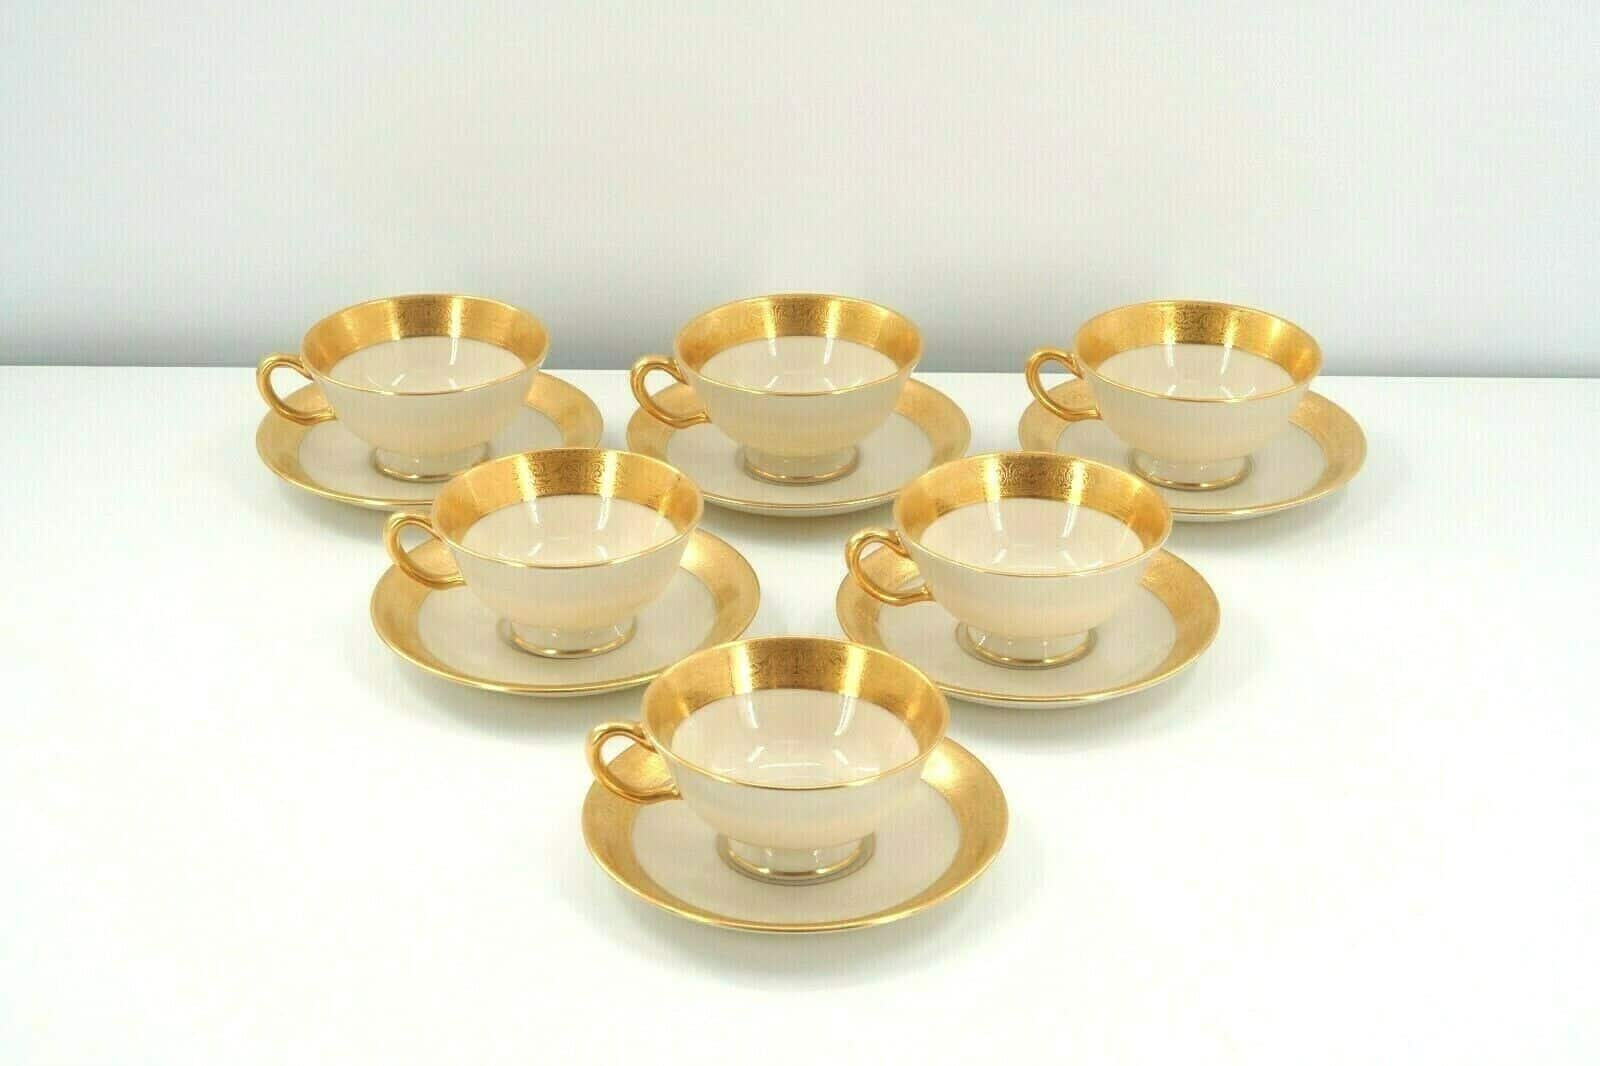 Lenox Westchester Gold Encrusted China Service